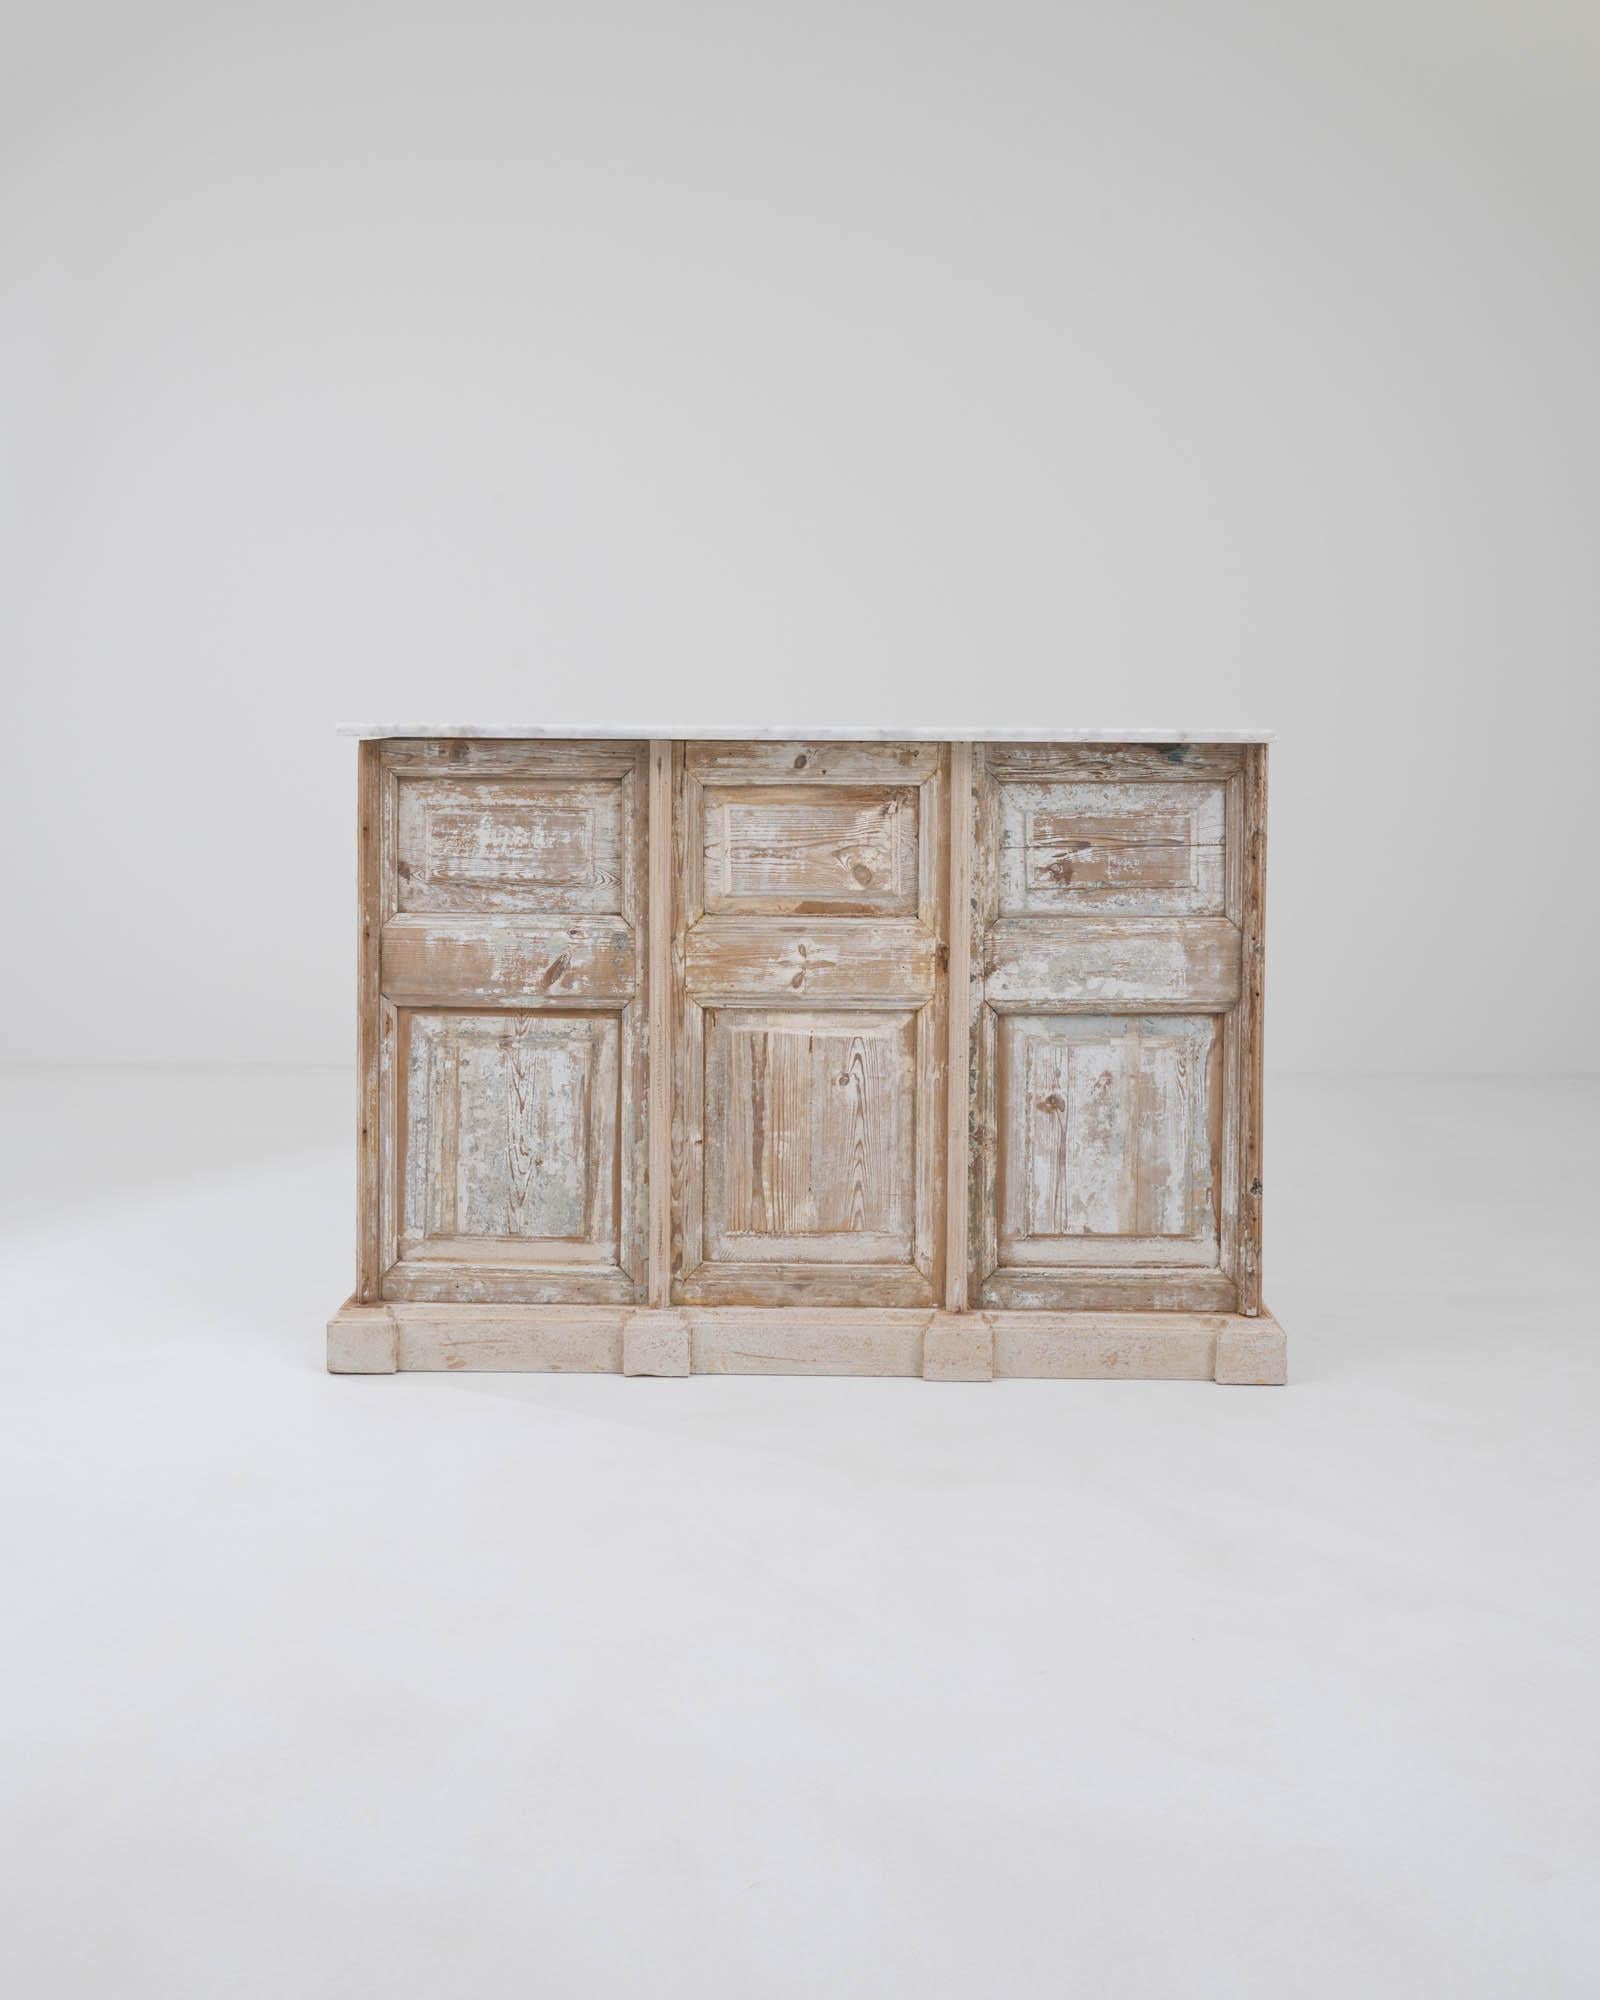 Sourced in Northern Africa, this striking patinated bar was constructed by artisans from vintage wooden doors. Formerly serving as entryways and passages in the imposing palatial townhomes where these paneled doors were once commonplace. The